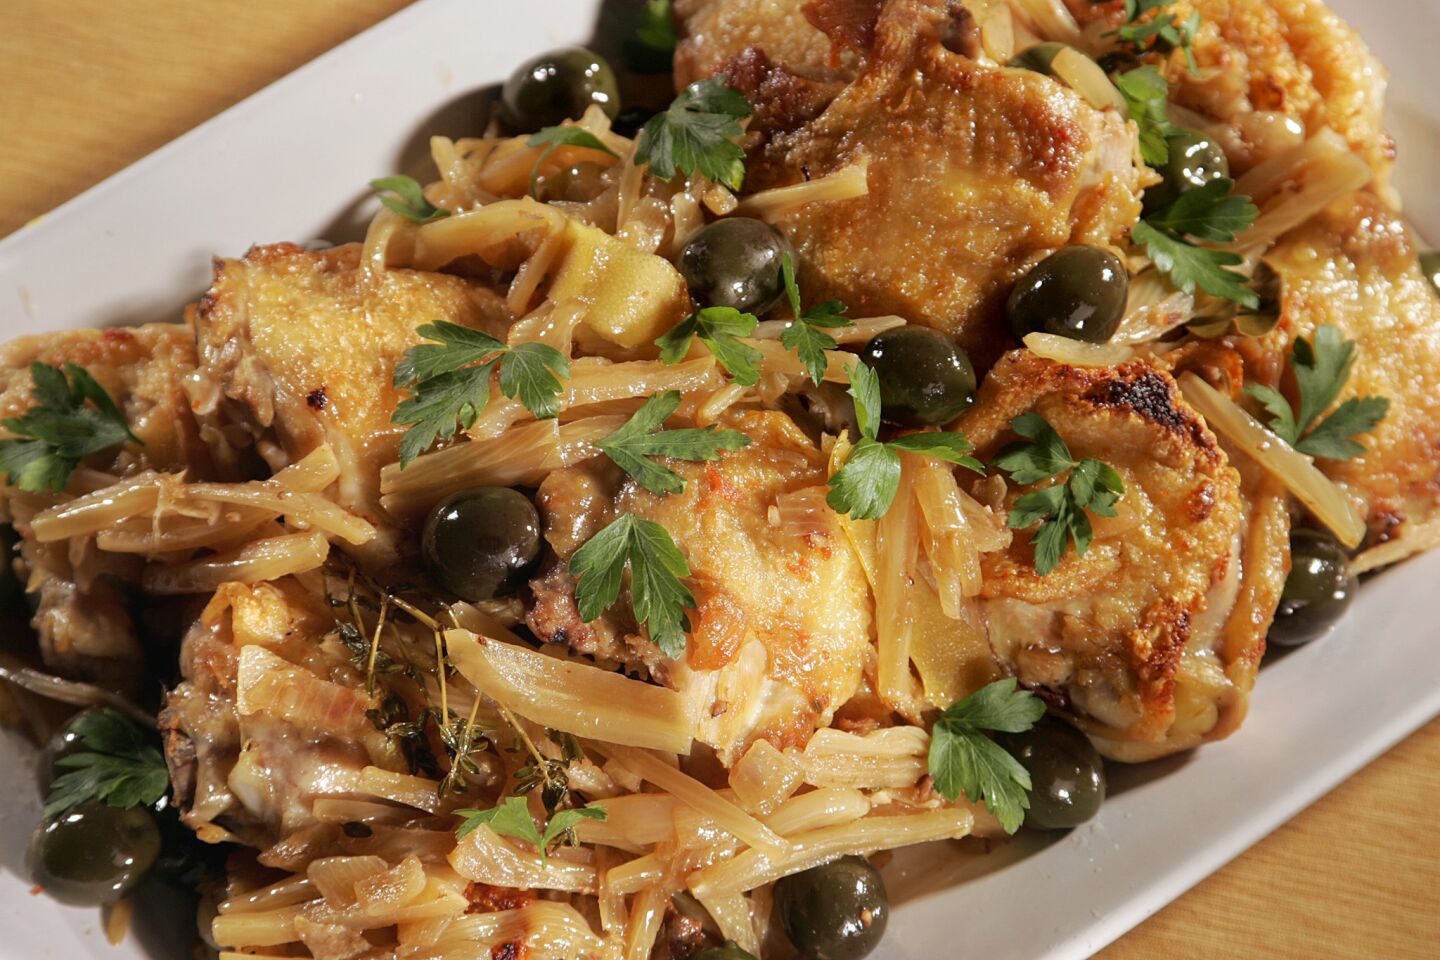 Feel like tackling a Thomas Keller recipe? In this recipe adapted from Keller's "Ad Hoc at Home," crisp, braised chicken thighs are at once rich yet bright with a great harmony of flavors, including olives, lemon zest and thinly sliced fennel. The whole dish comes together in just over an hour.